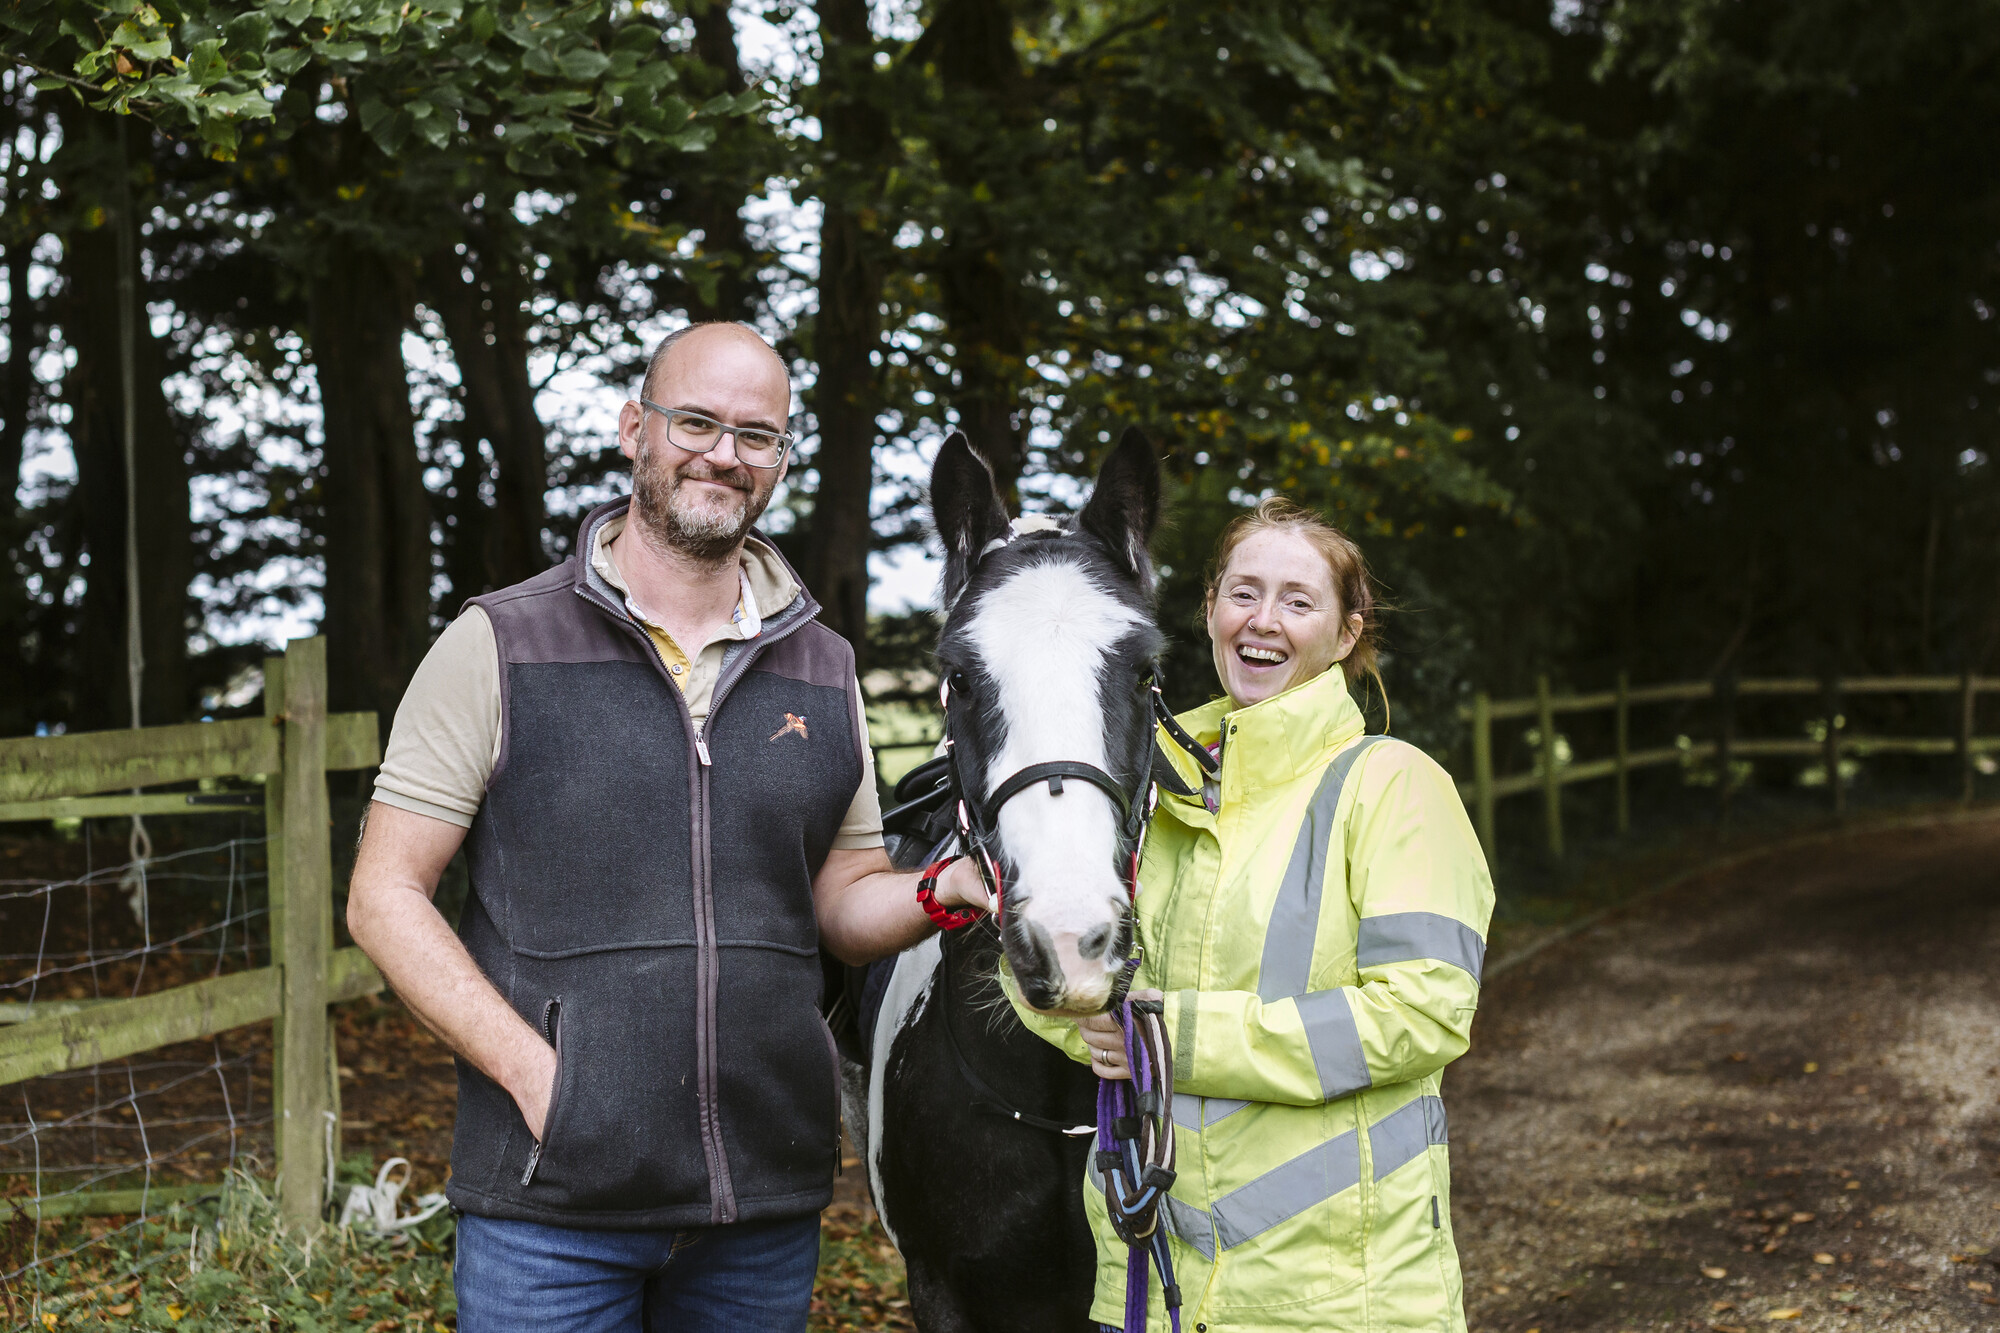 Micky, the black and white horse, with new owners Abi and James standing either side of him